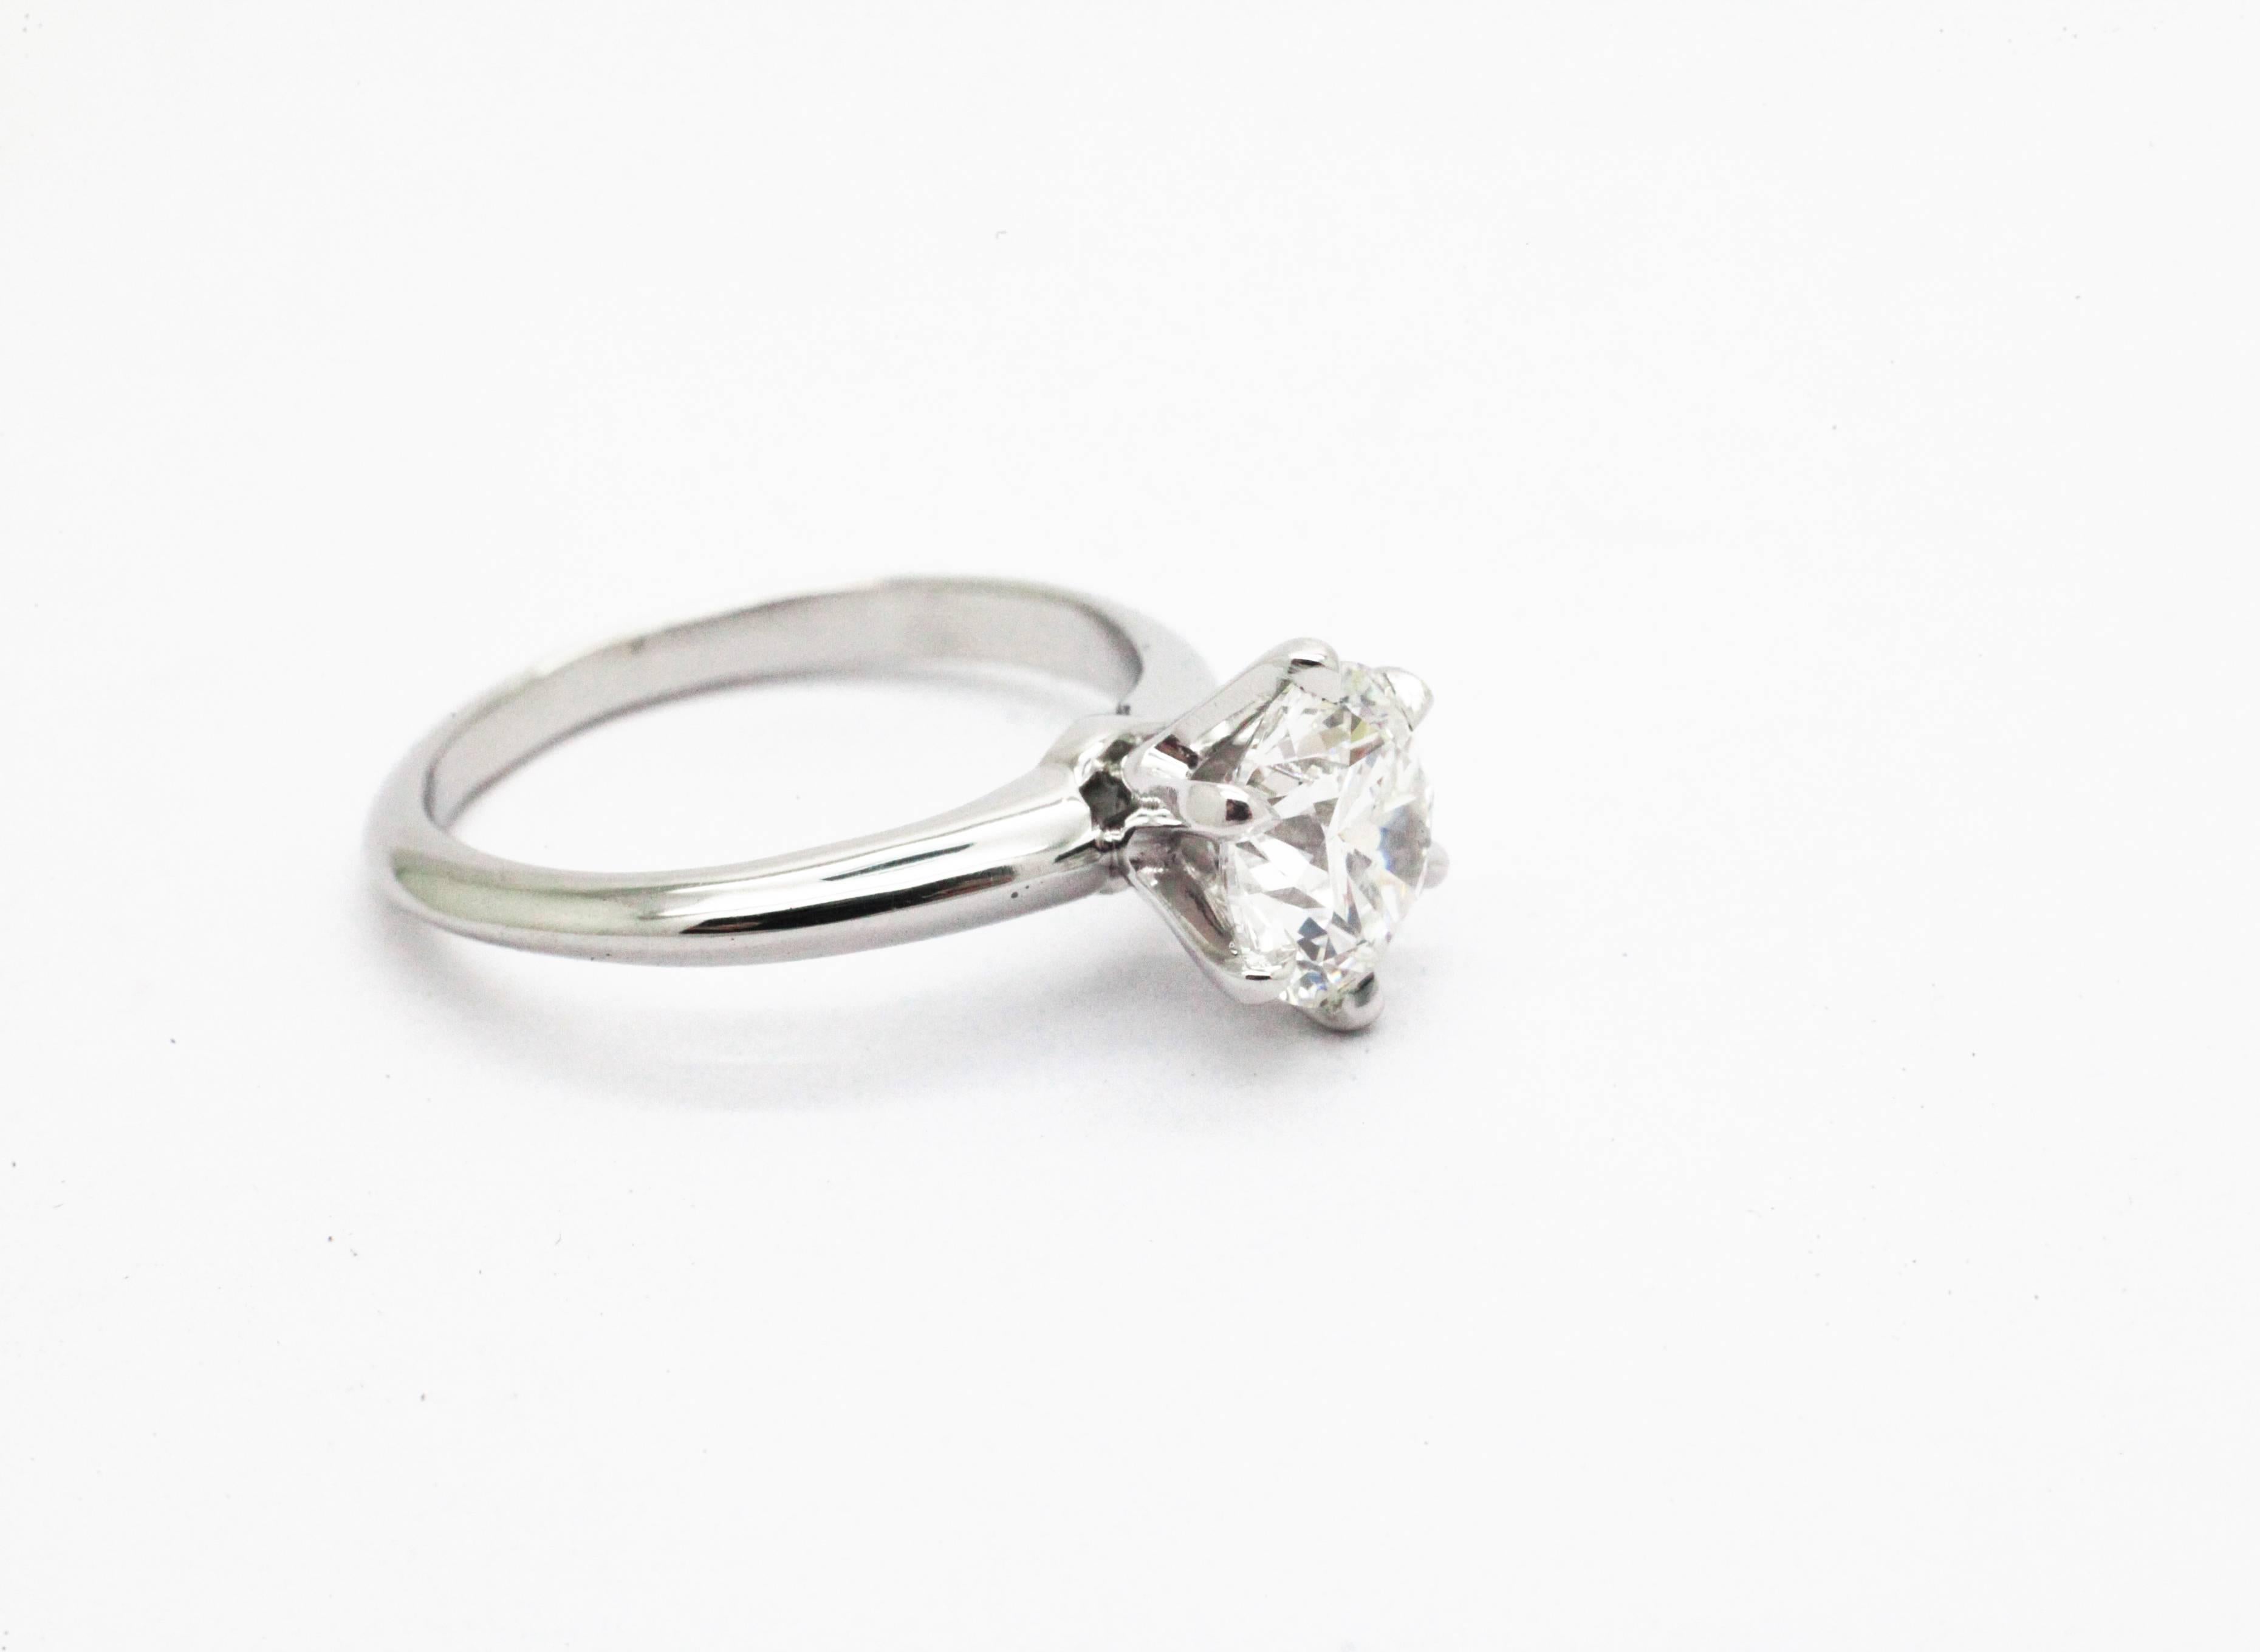 Perfectly hand crafted Platinum solitaire engagement ring by FERRUCCI, 
with six claw shaped prong and classic, everlasting, style shank.
Entirely made in New York City by Italian master jeweler showcasing a stunning
GIA Certified round brilliant